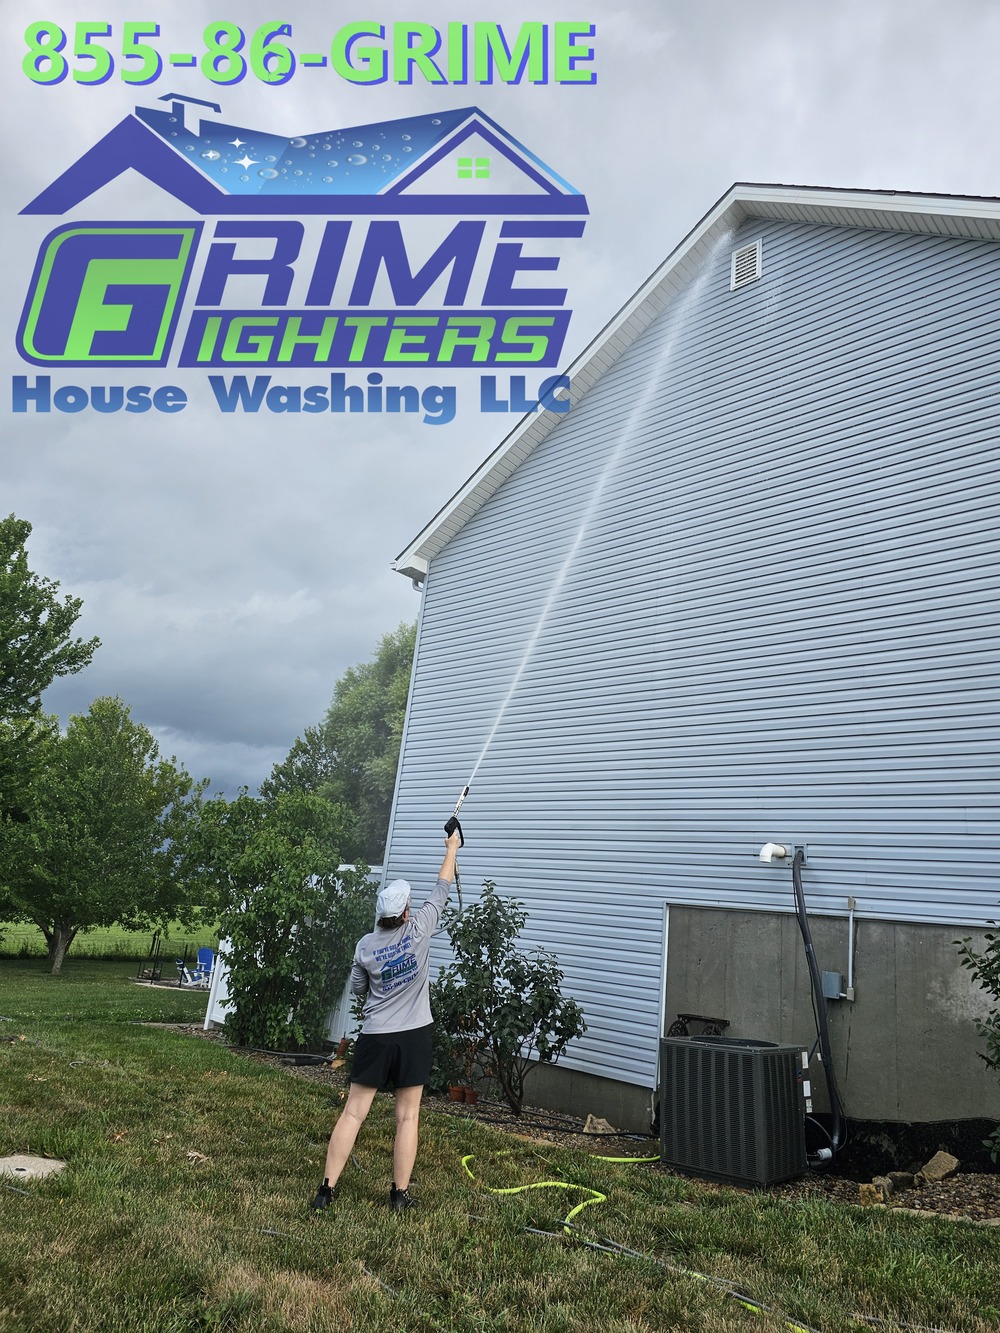 Restoring Sparkle to another lovely Home in Trimble, Missouri!